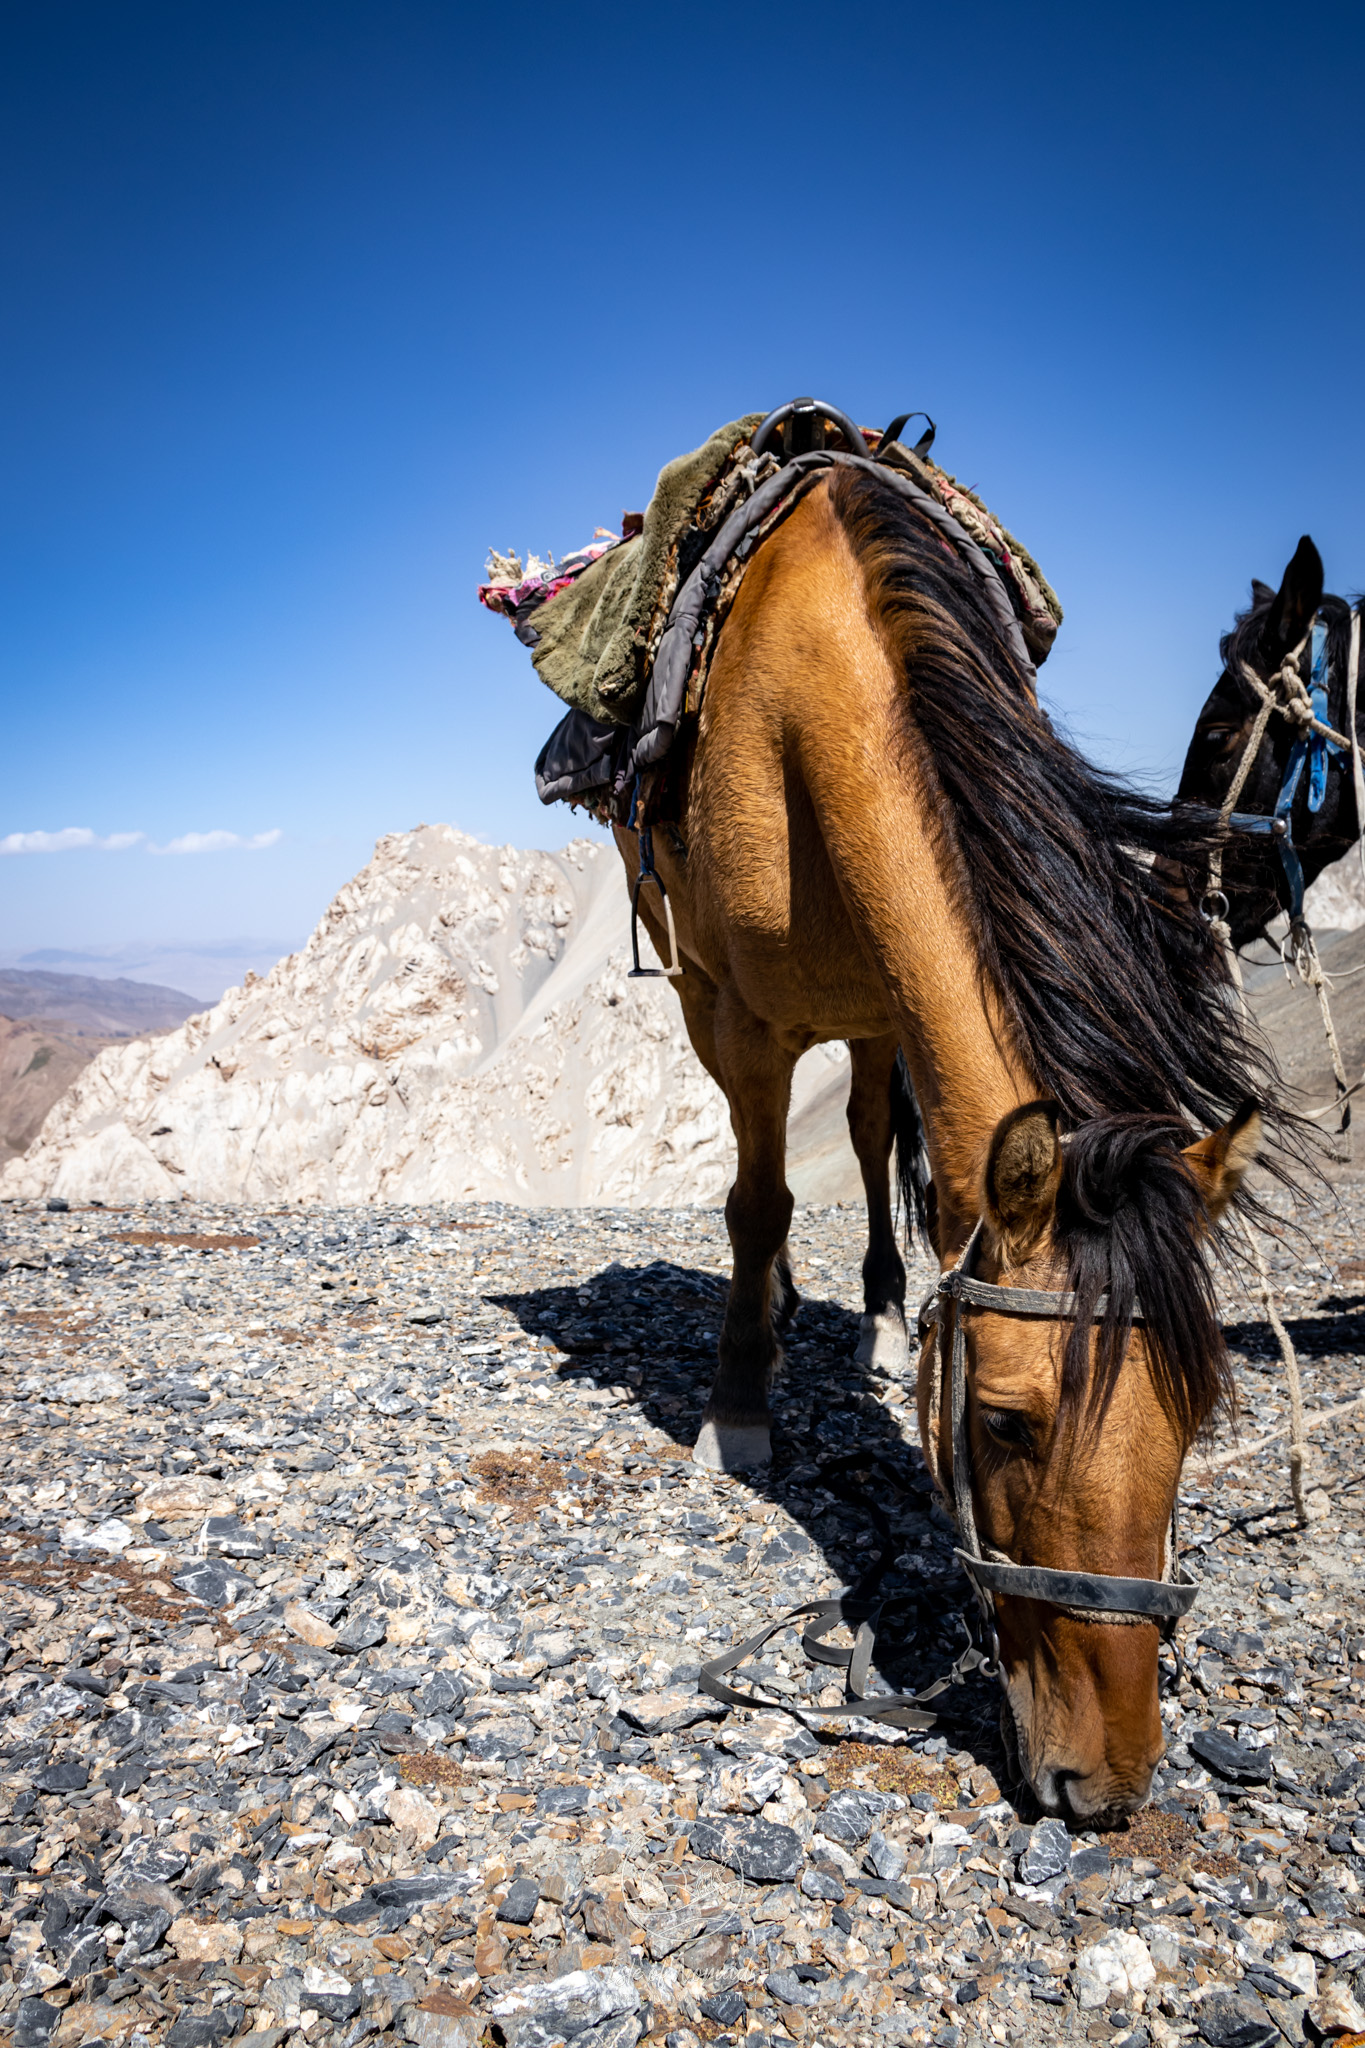 A horse ride is a must do activity when in Kyrgyzstan...